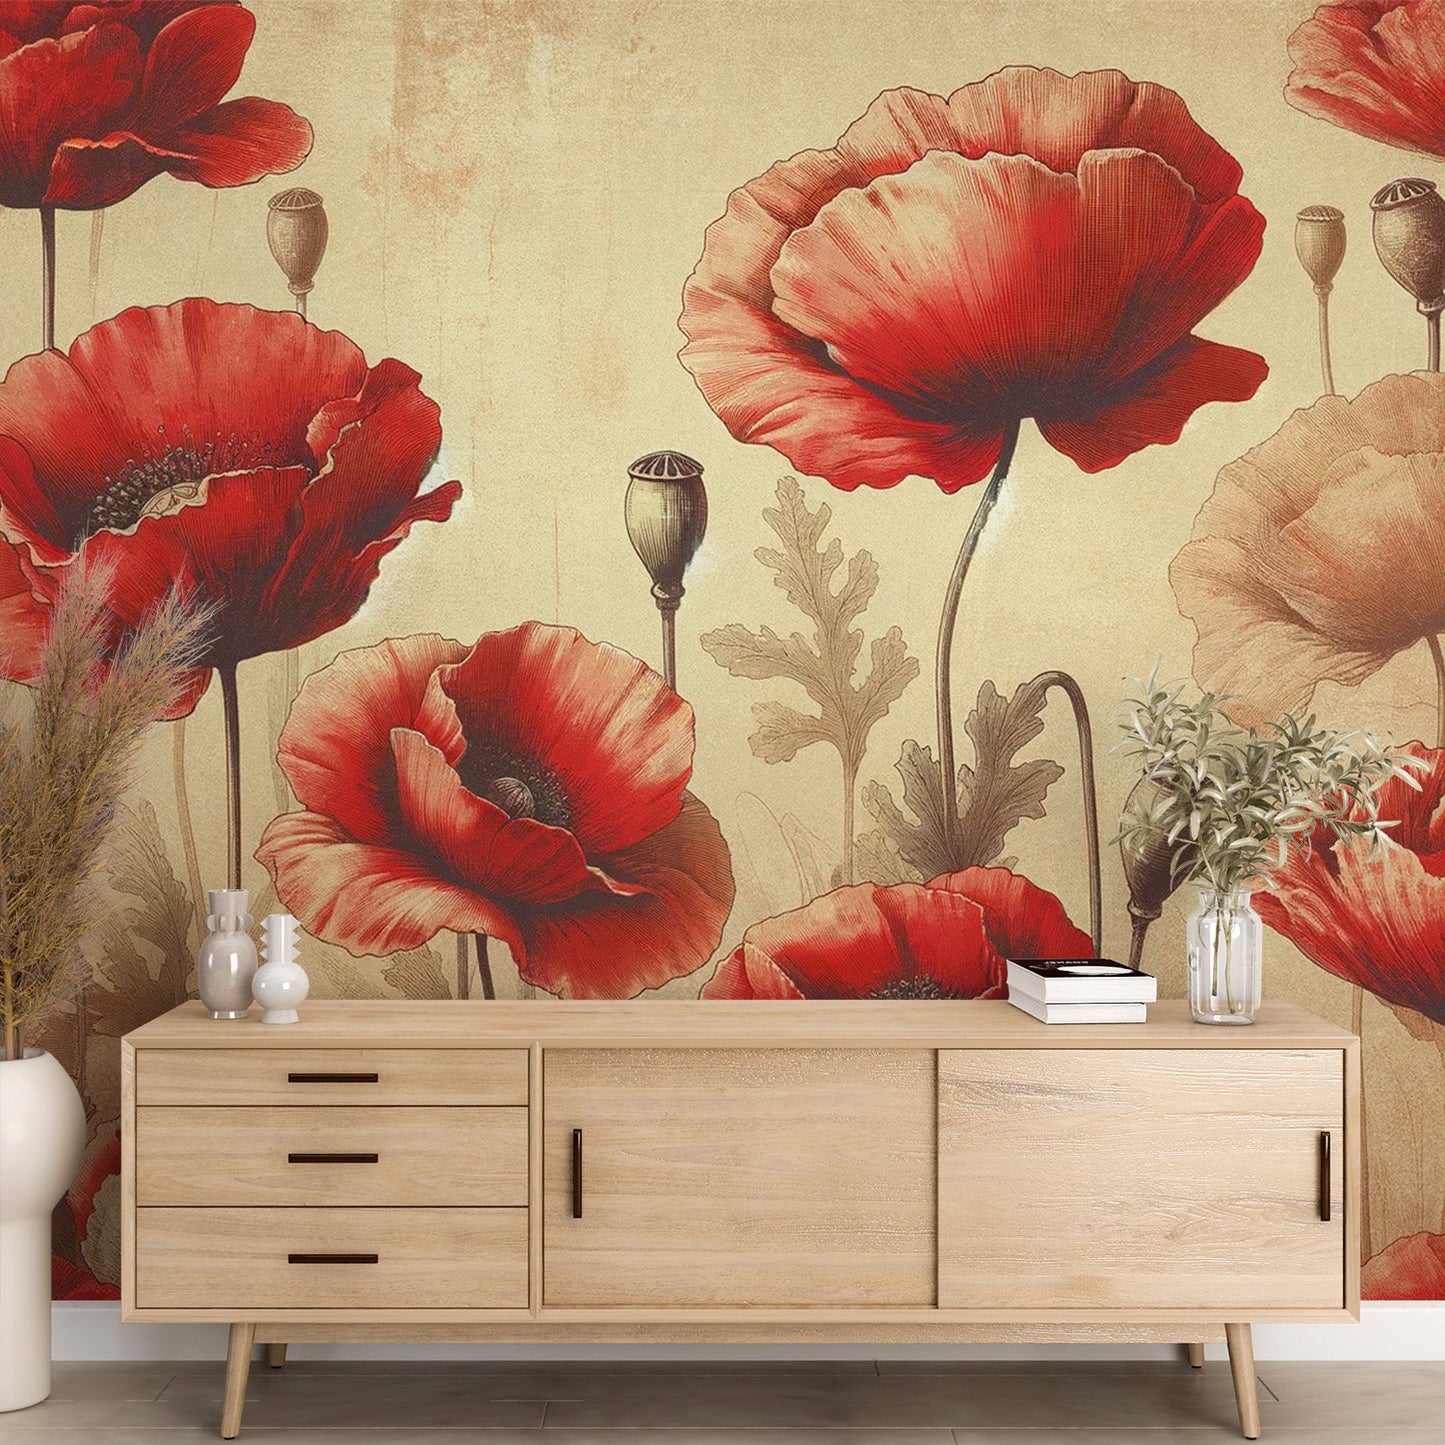 Poppy wallpaper | Red flowers with vintage background